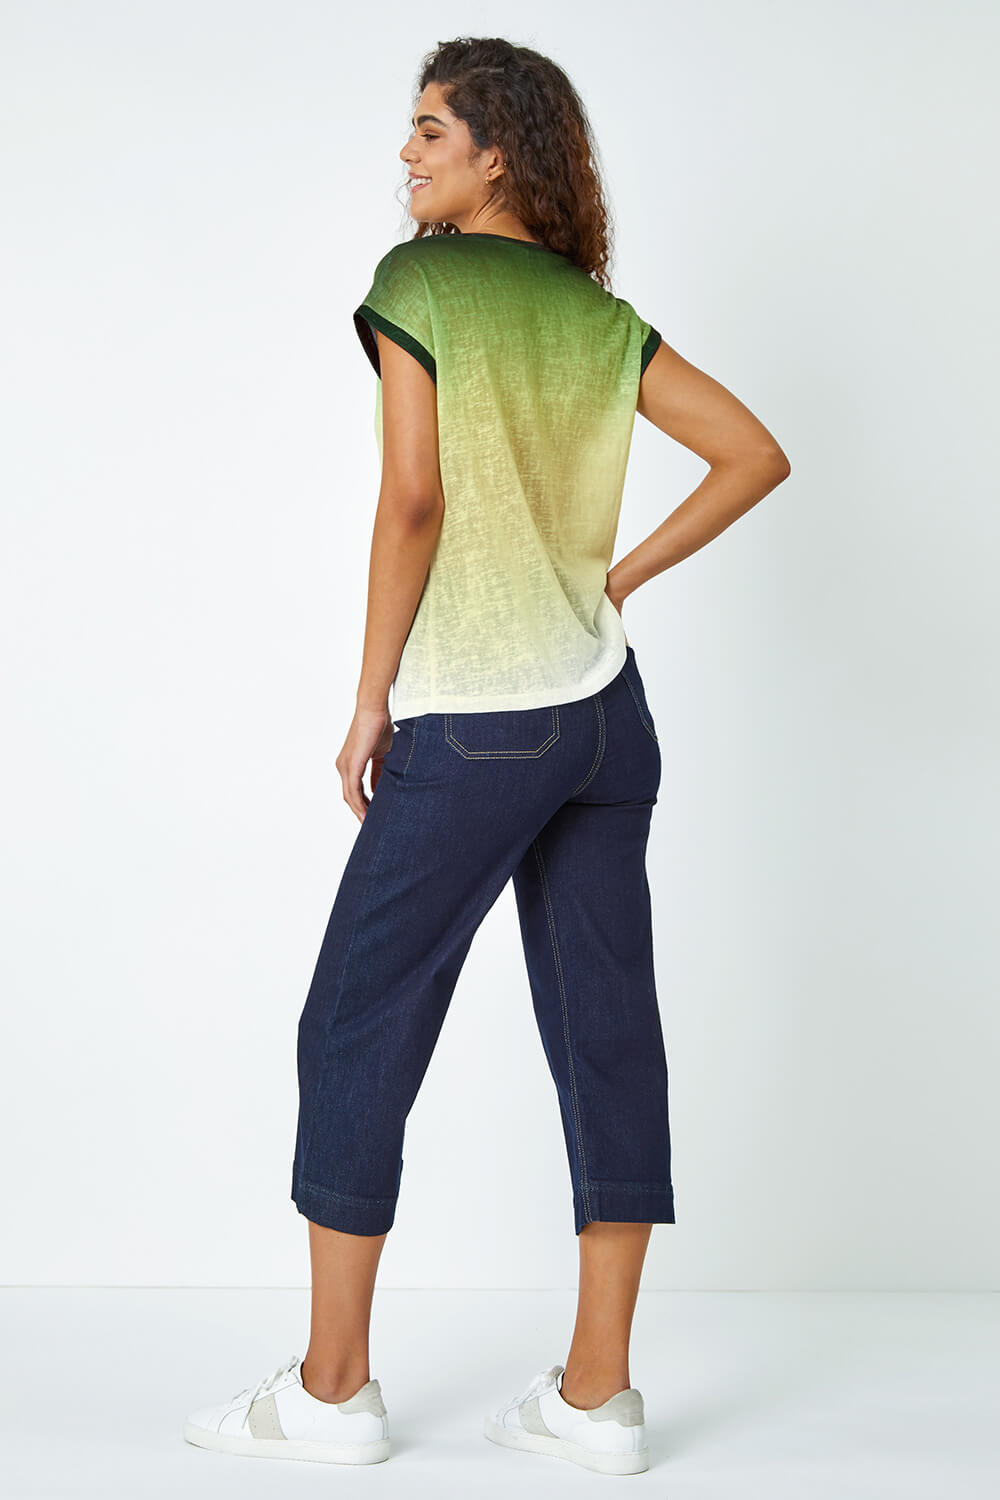 Green Ombre Print Stretch T-Shirt, Image 3 of 5